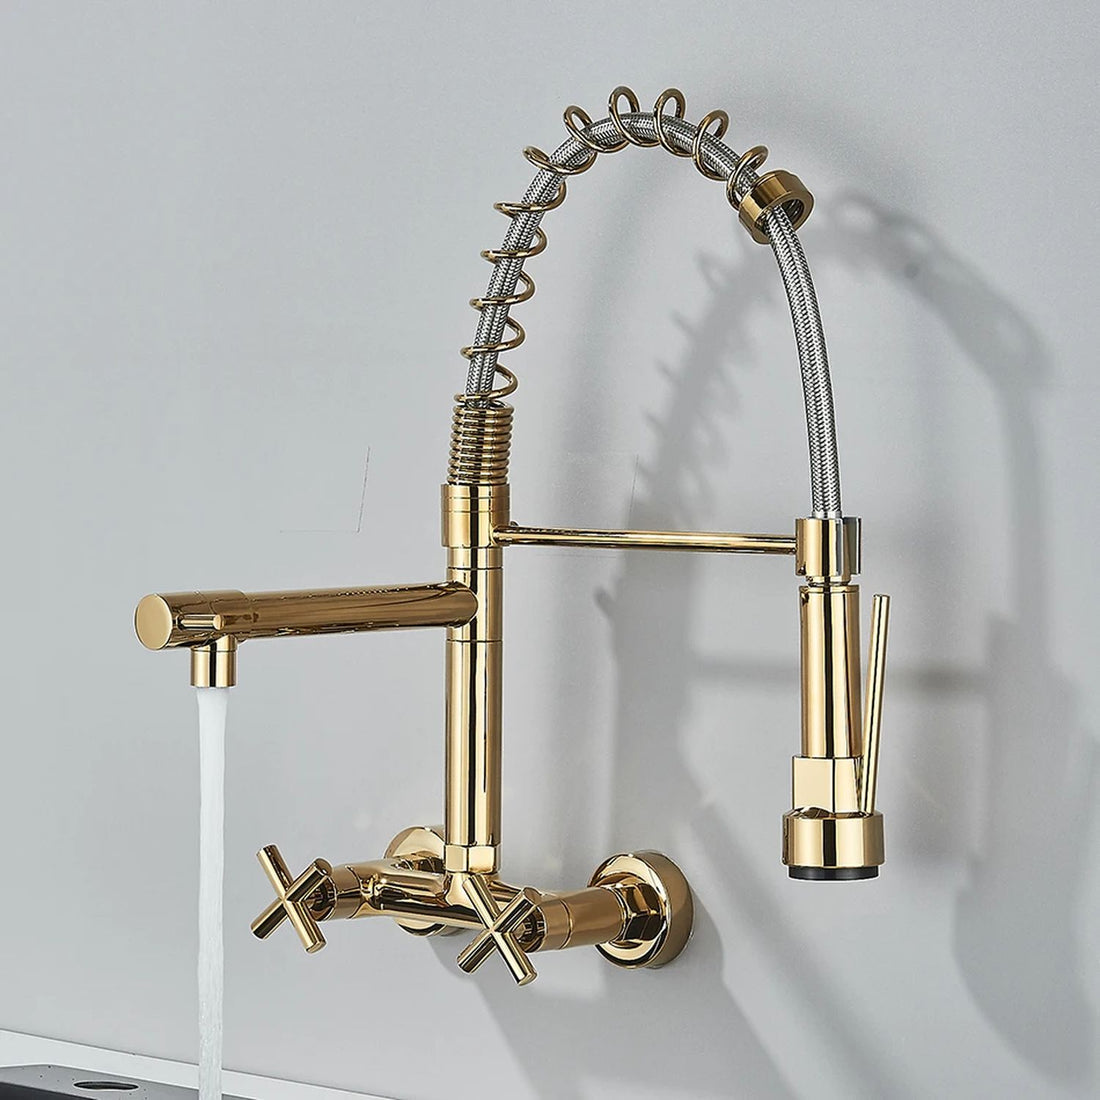 InArt Elite Luxury Kitchen Sink Tap | Wall-Mounted, 360° Pull-Down Sprayer, Gold Finish | Multi-Function Spray Head with Hot & Cold Functionality - InArt-Studio